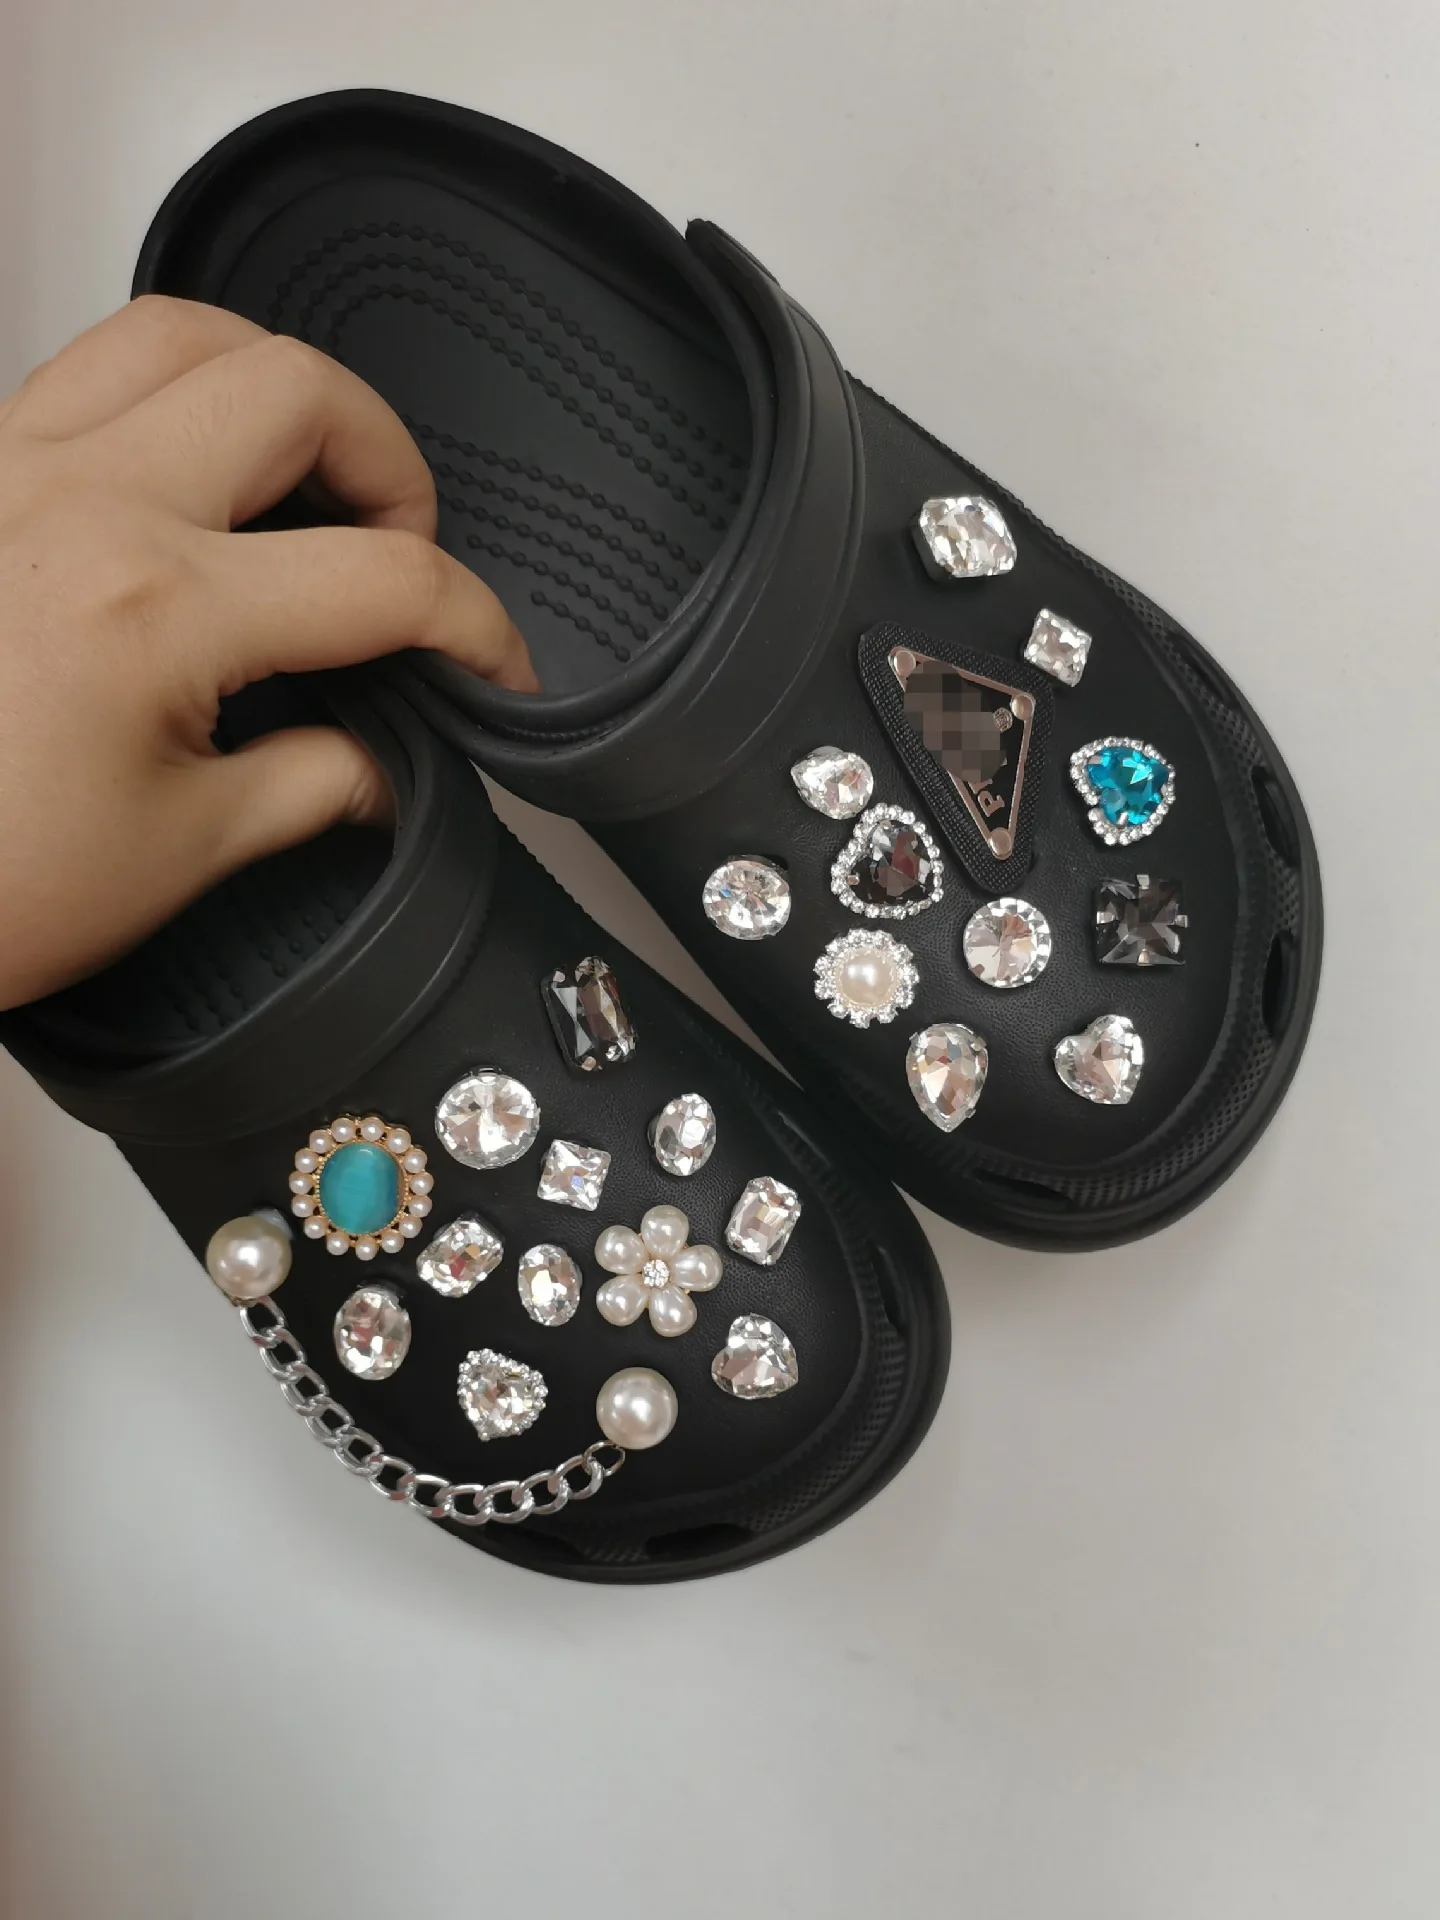 Luxury Brand Designer Gold Metal Shoe Accessories Fine Color Bling  Rhinestone Croc Charms Decaration for JIBZ Clog Girl Gift SHE